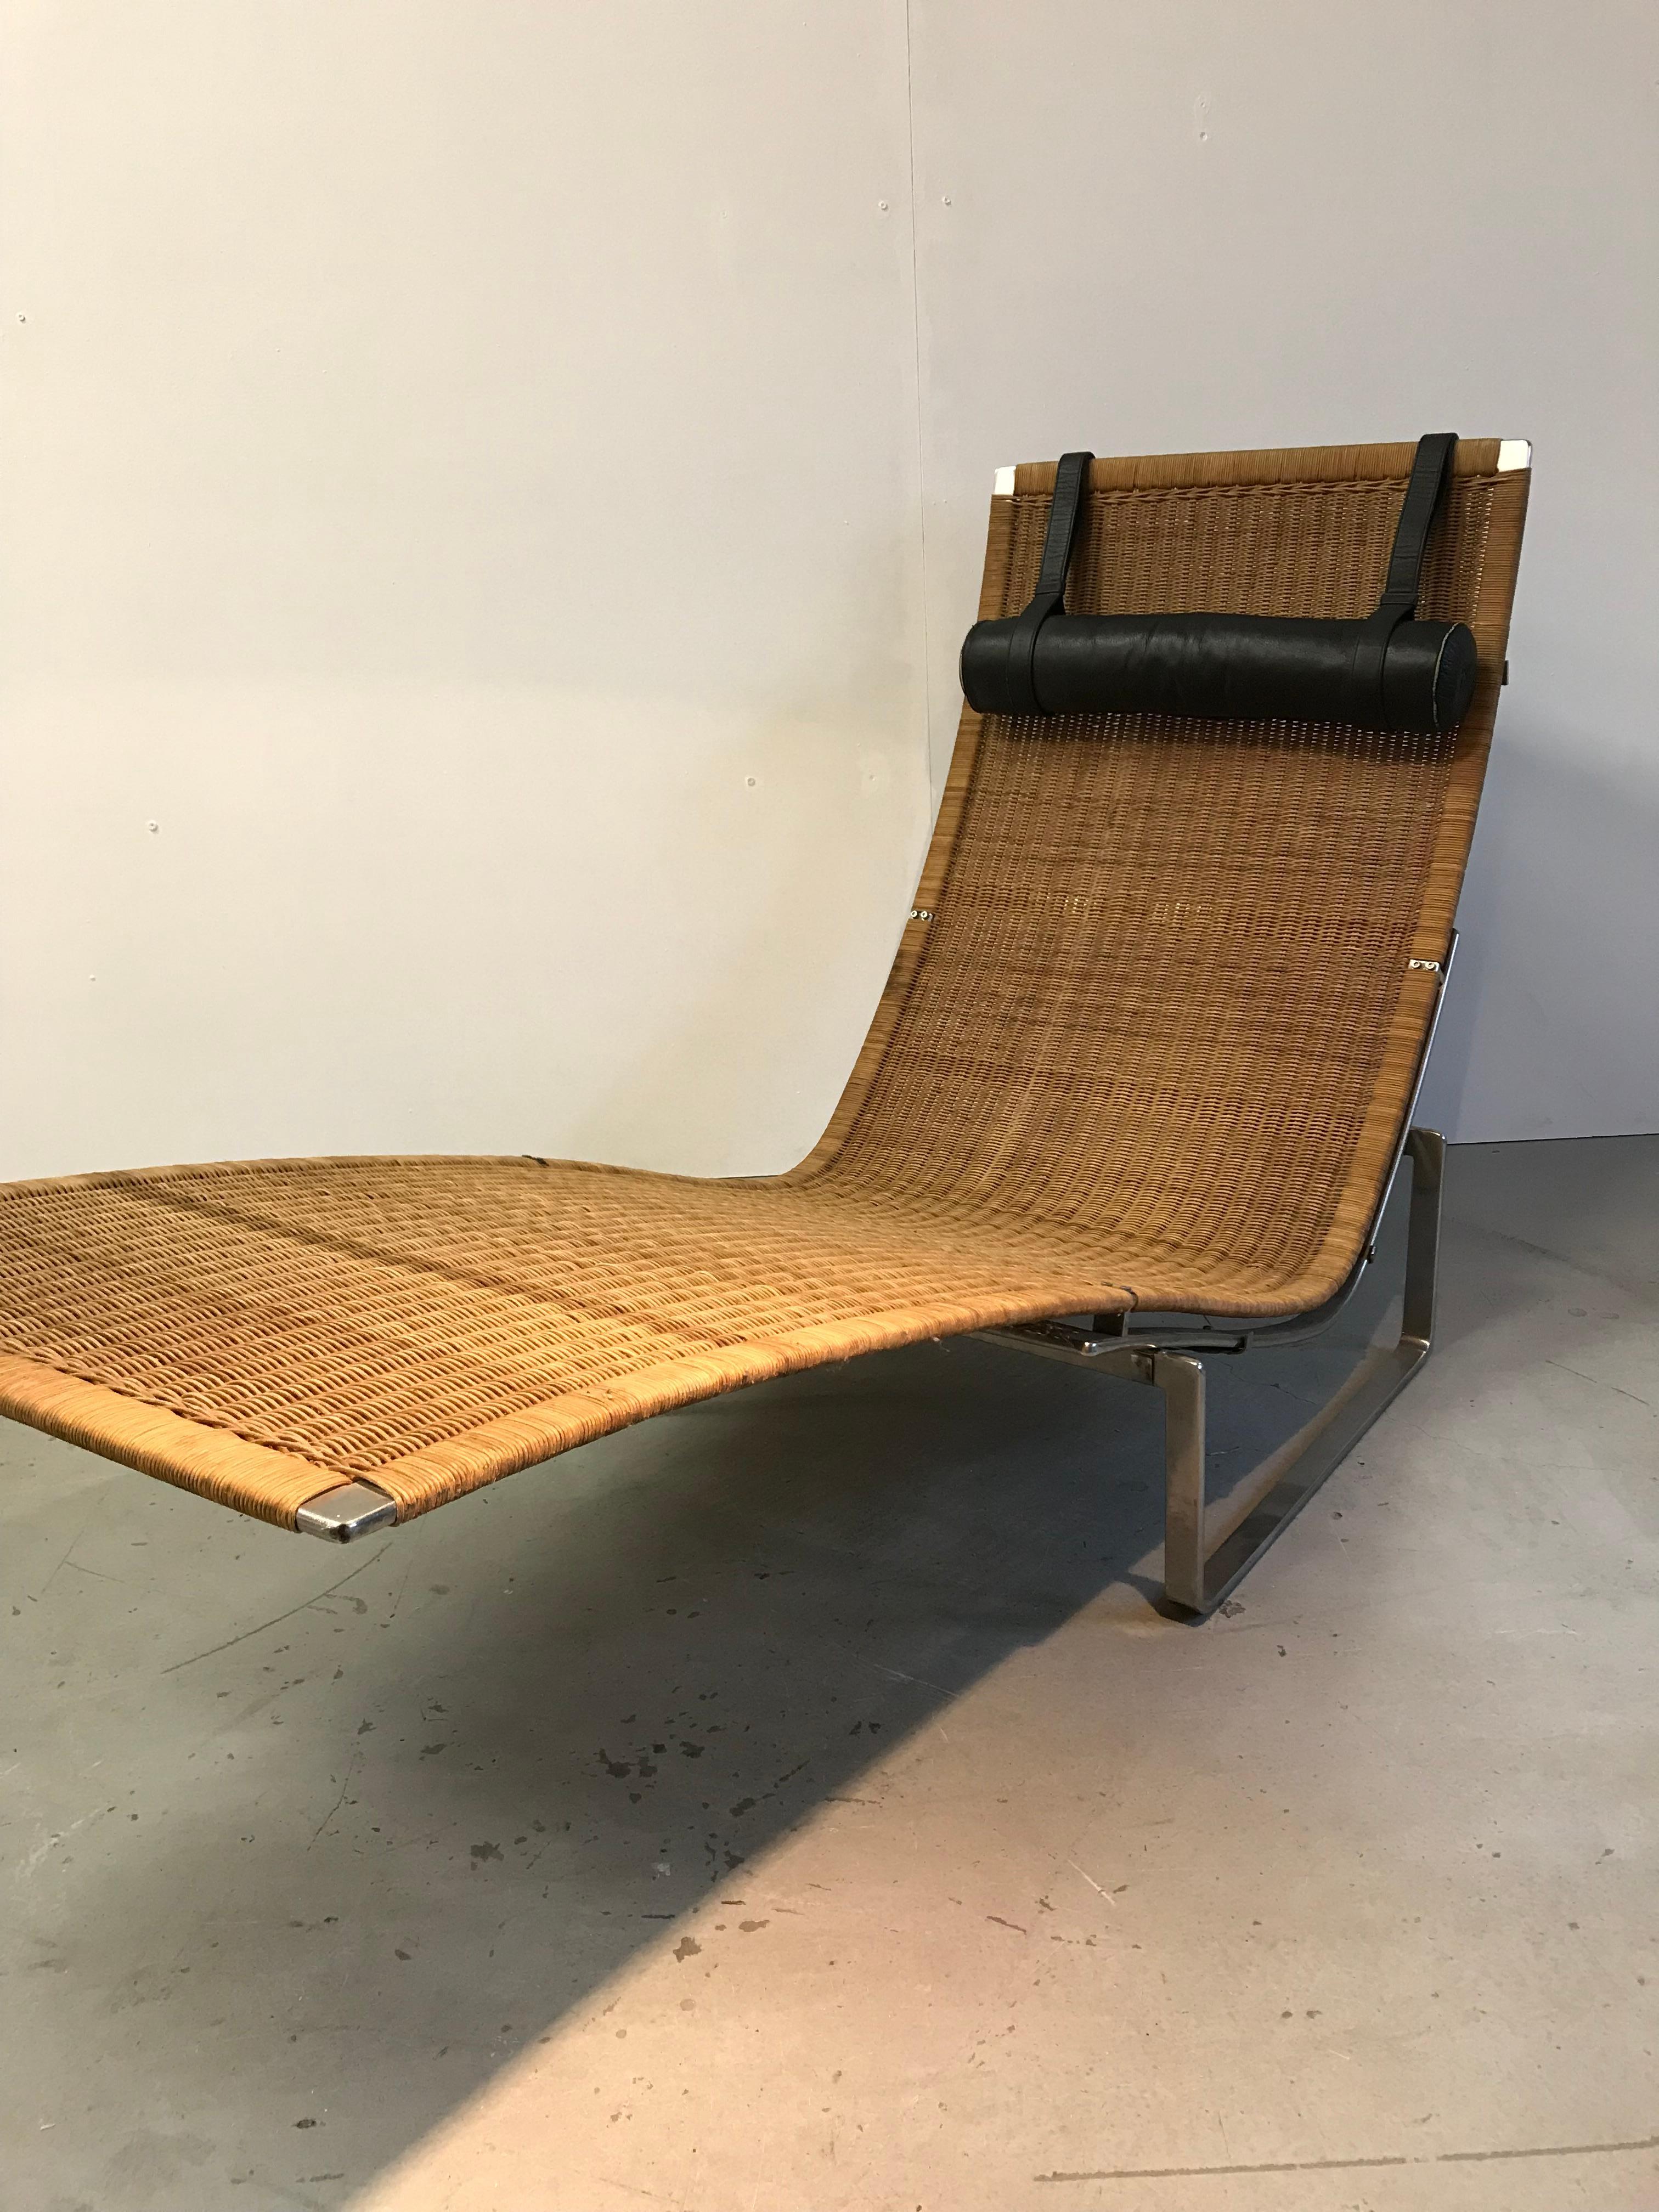 Poul Kjaerholm PK24 Kold Christensen from the 1970s.
Black leather cushion with nice patinated wicker.
Good vintage condition.
 